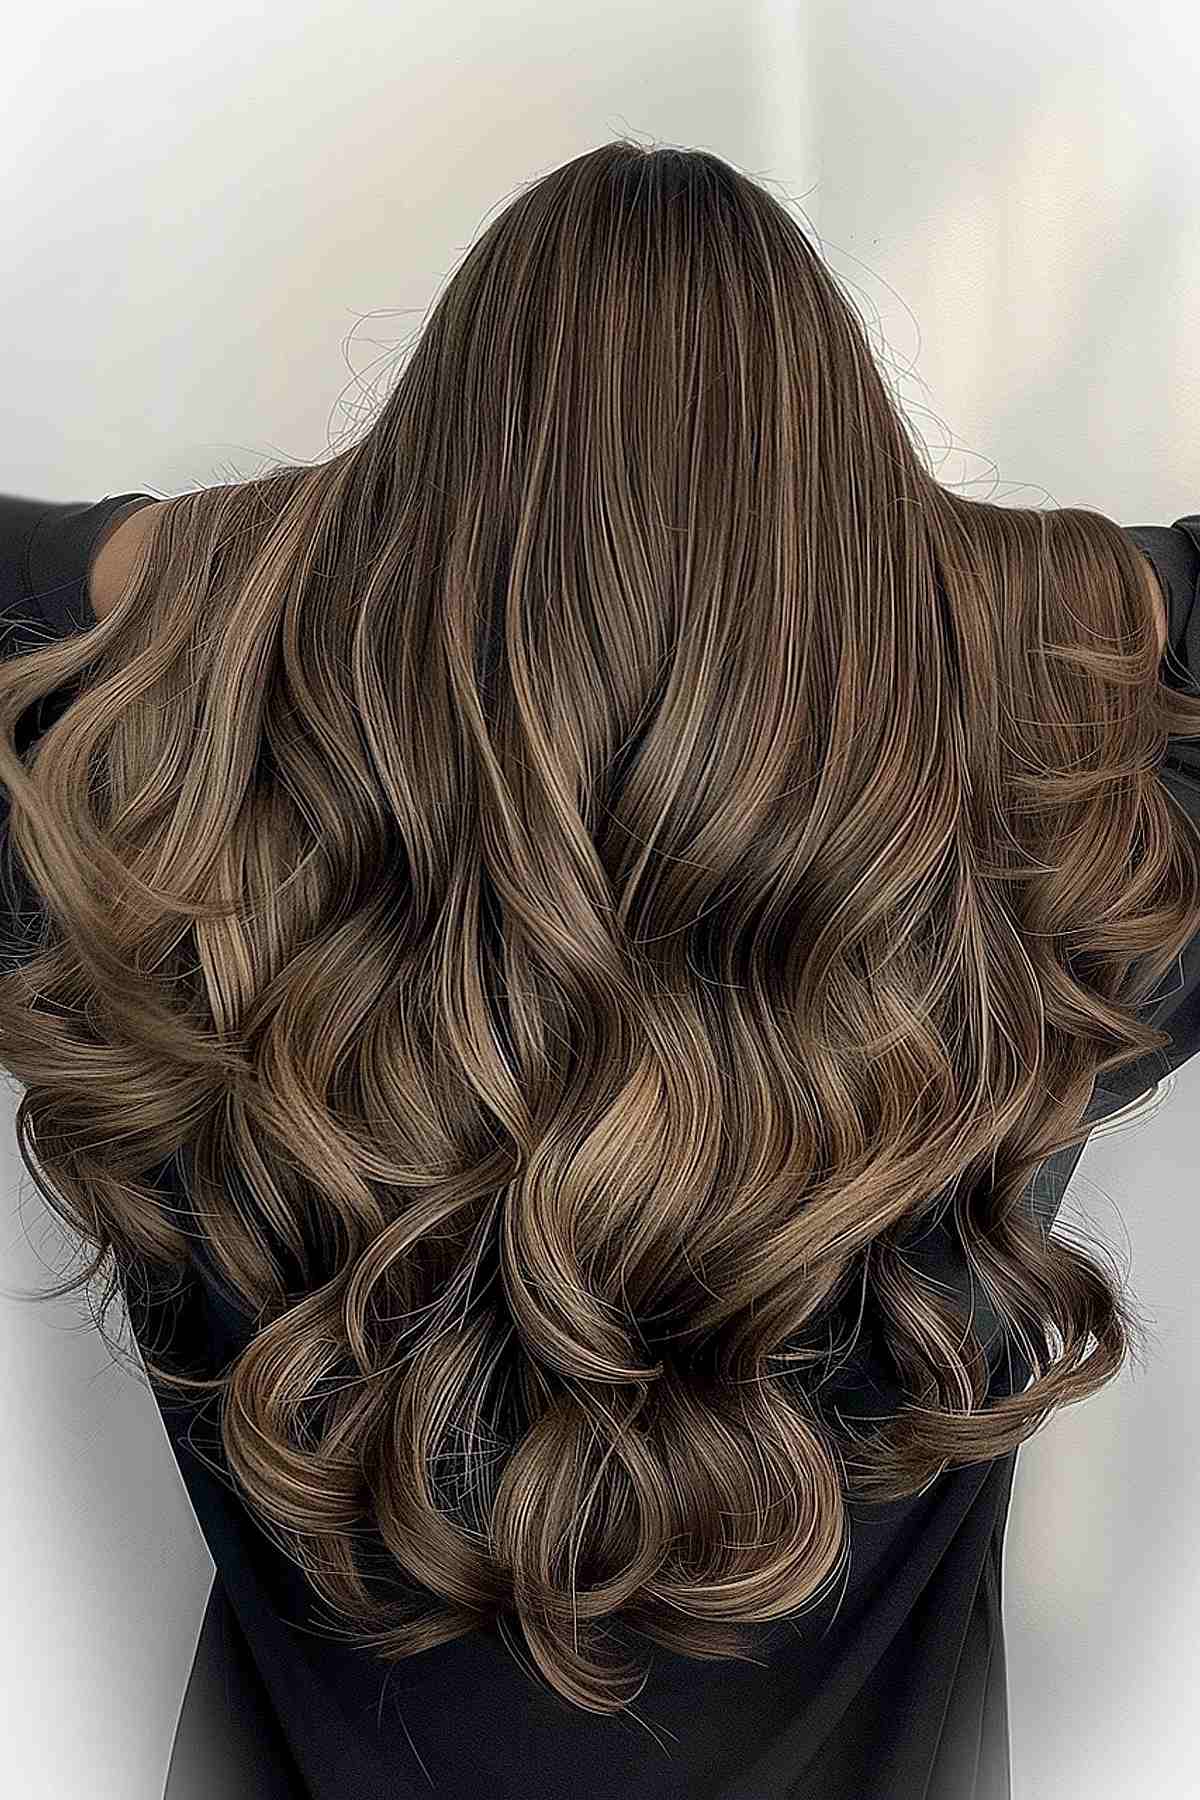 Luxurious long waves with a balayage technique on mushroom brown hair, highlighting depth and movement with expert color blending.